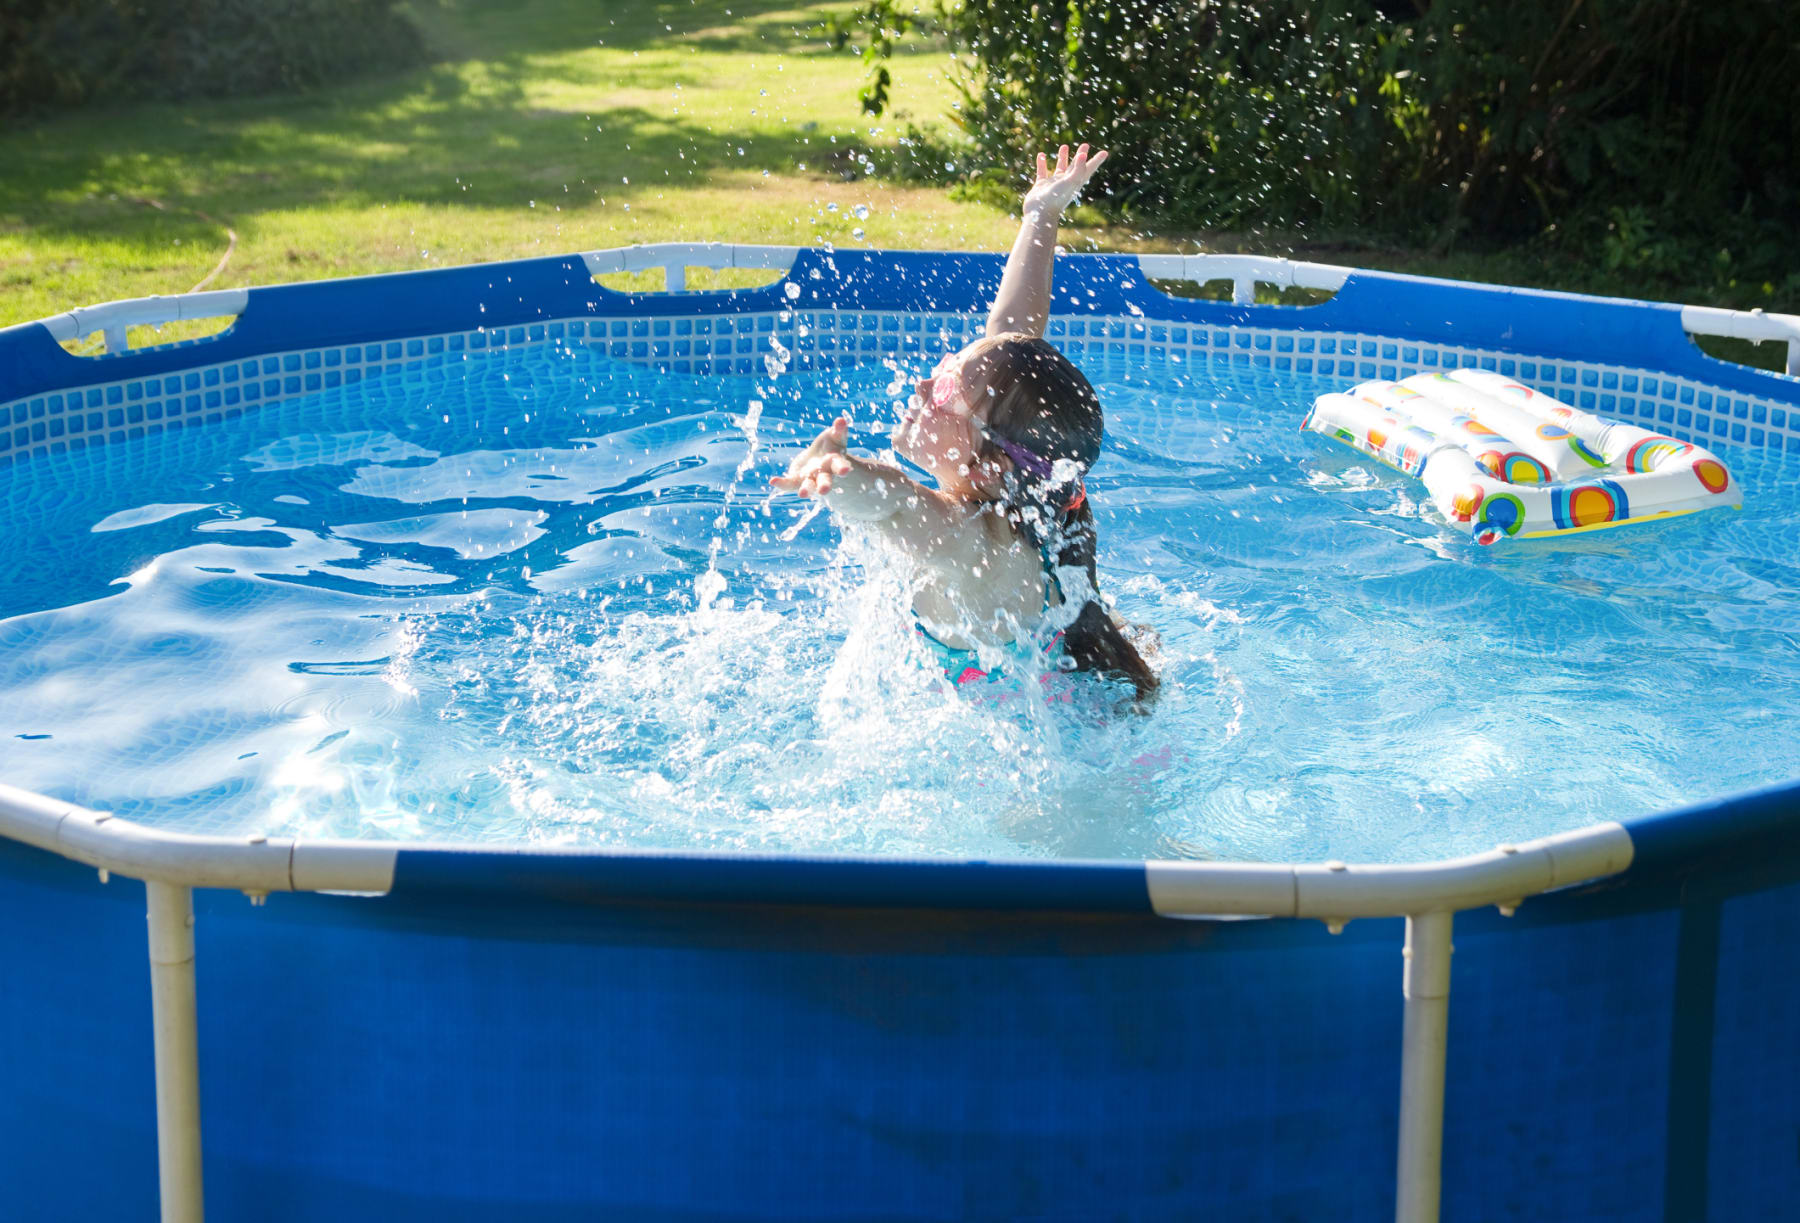 Child plays in above-ground swimming pool.